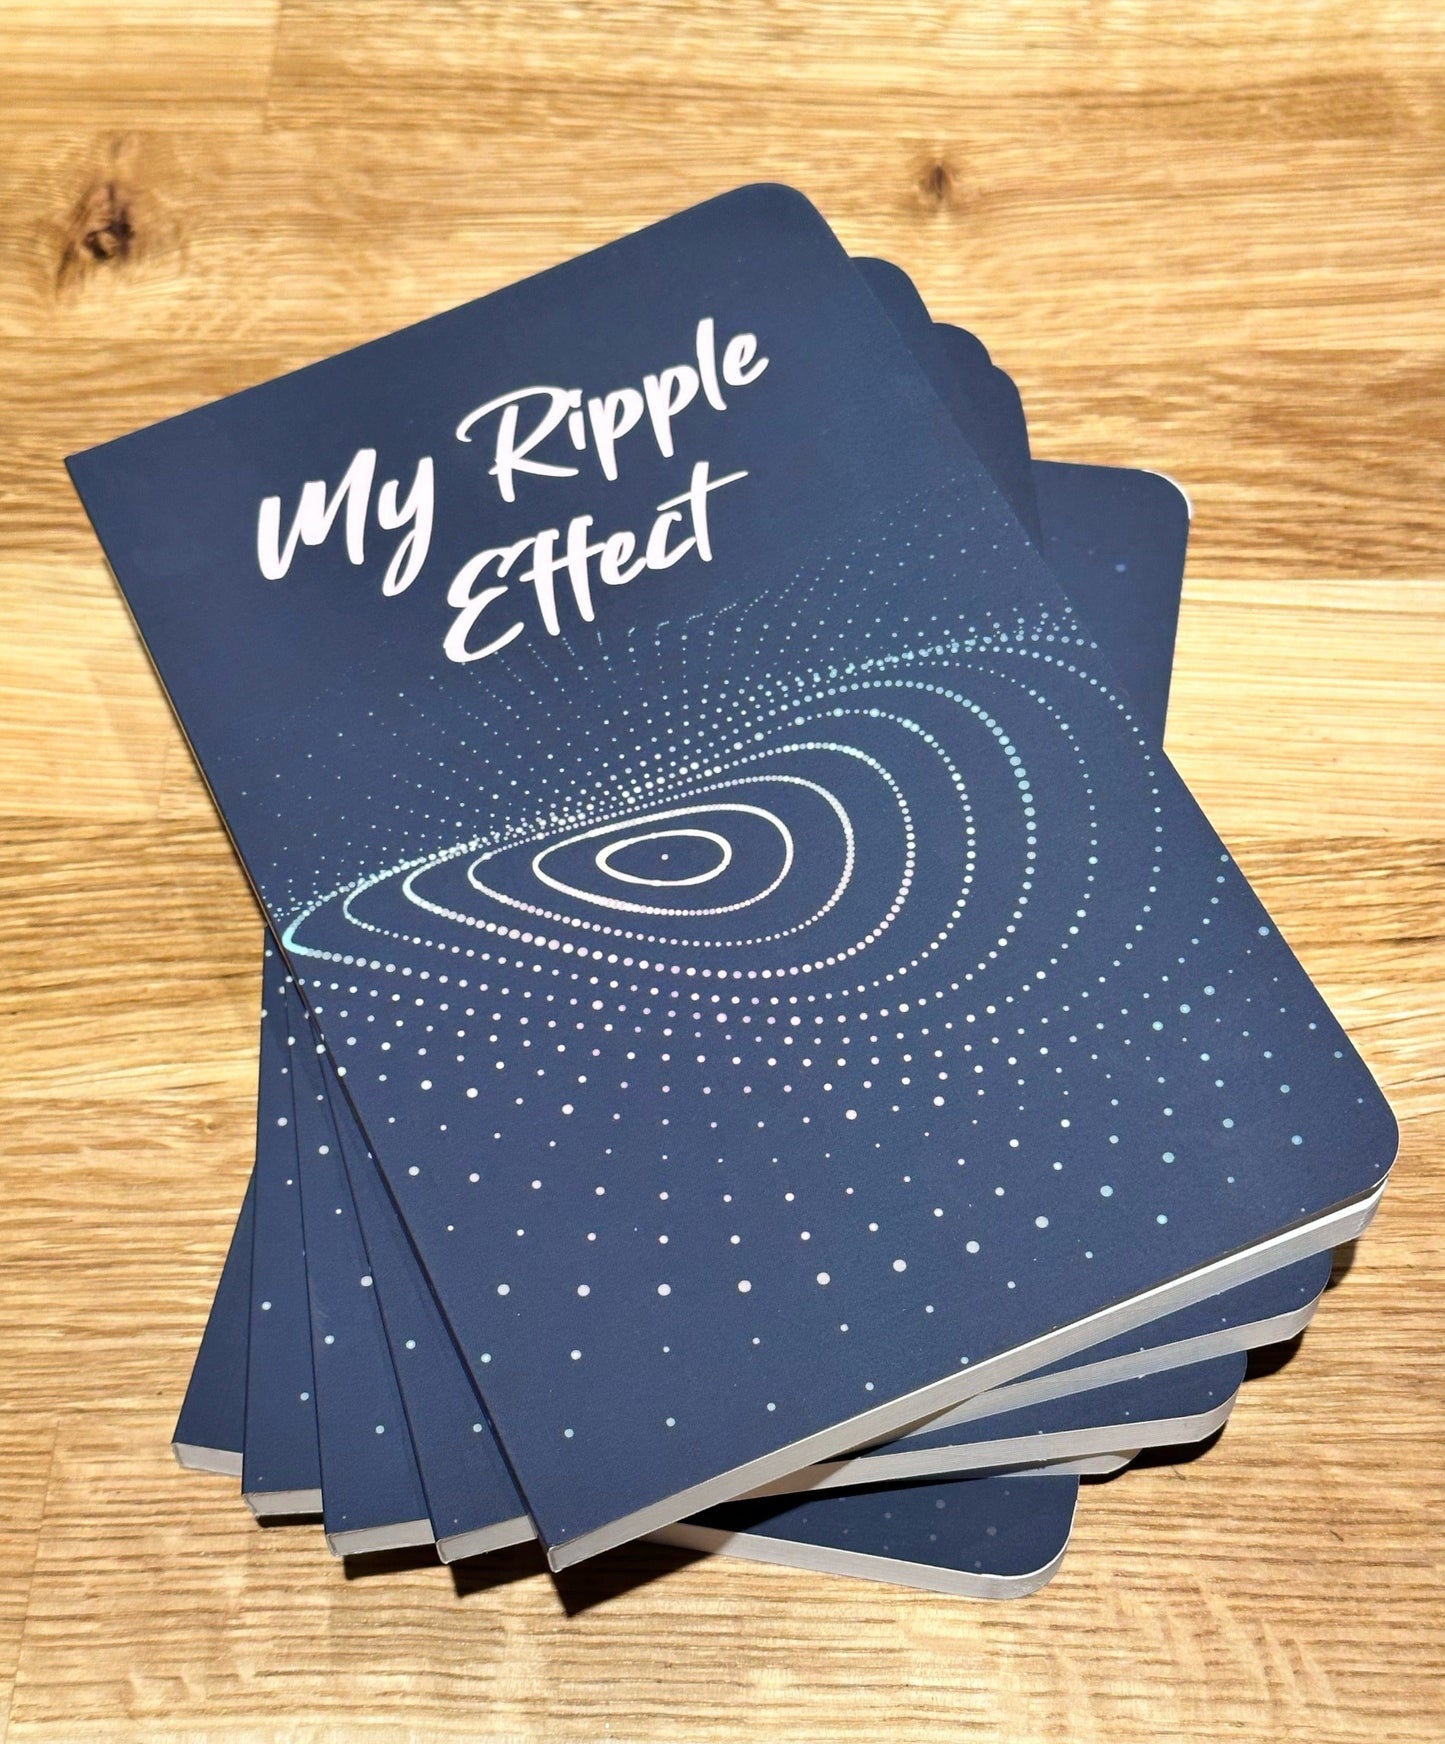 My ripple effect planner - Wild and Heart